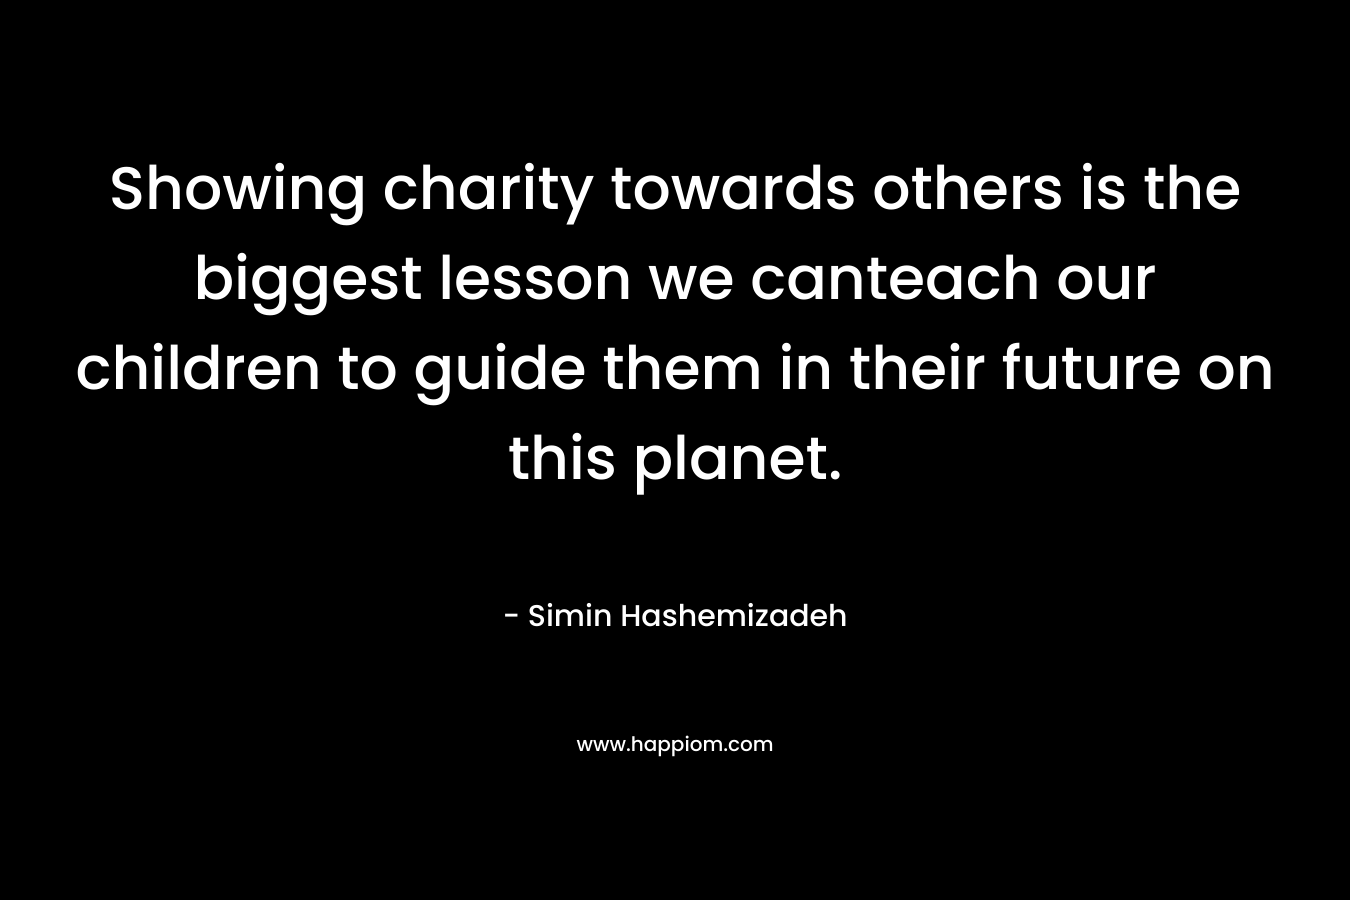 Showing charity towards others is the biggest lesson we canteach our children to guide them in their future on this planet.  – Simin Hashemizadeh